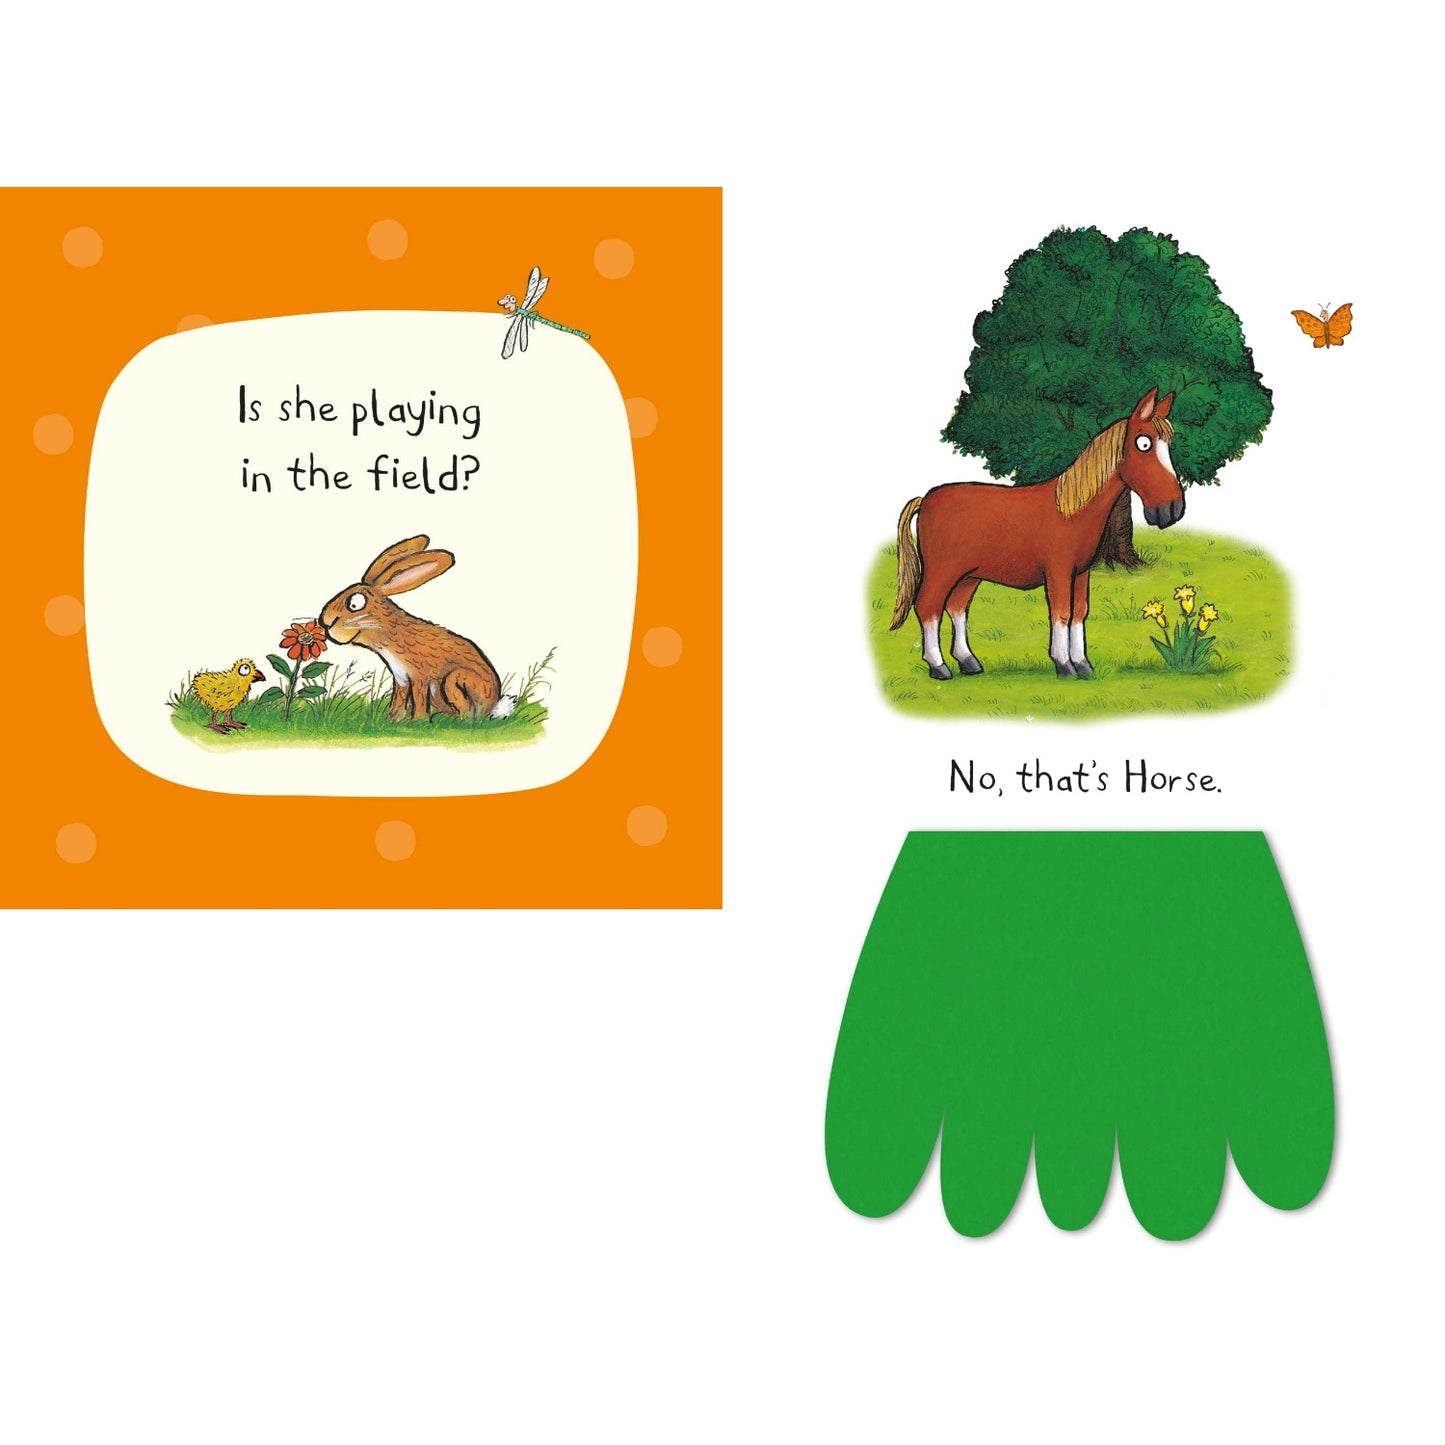 Who's Hiding On The Farm? | Felt Flaps Board Book for Babies & Toddlers